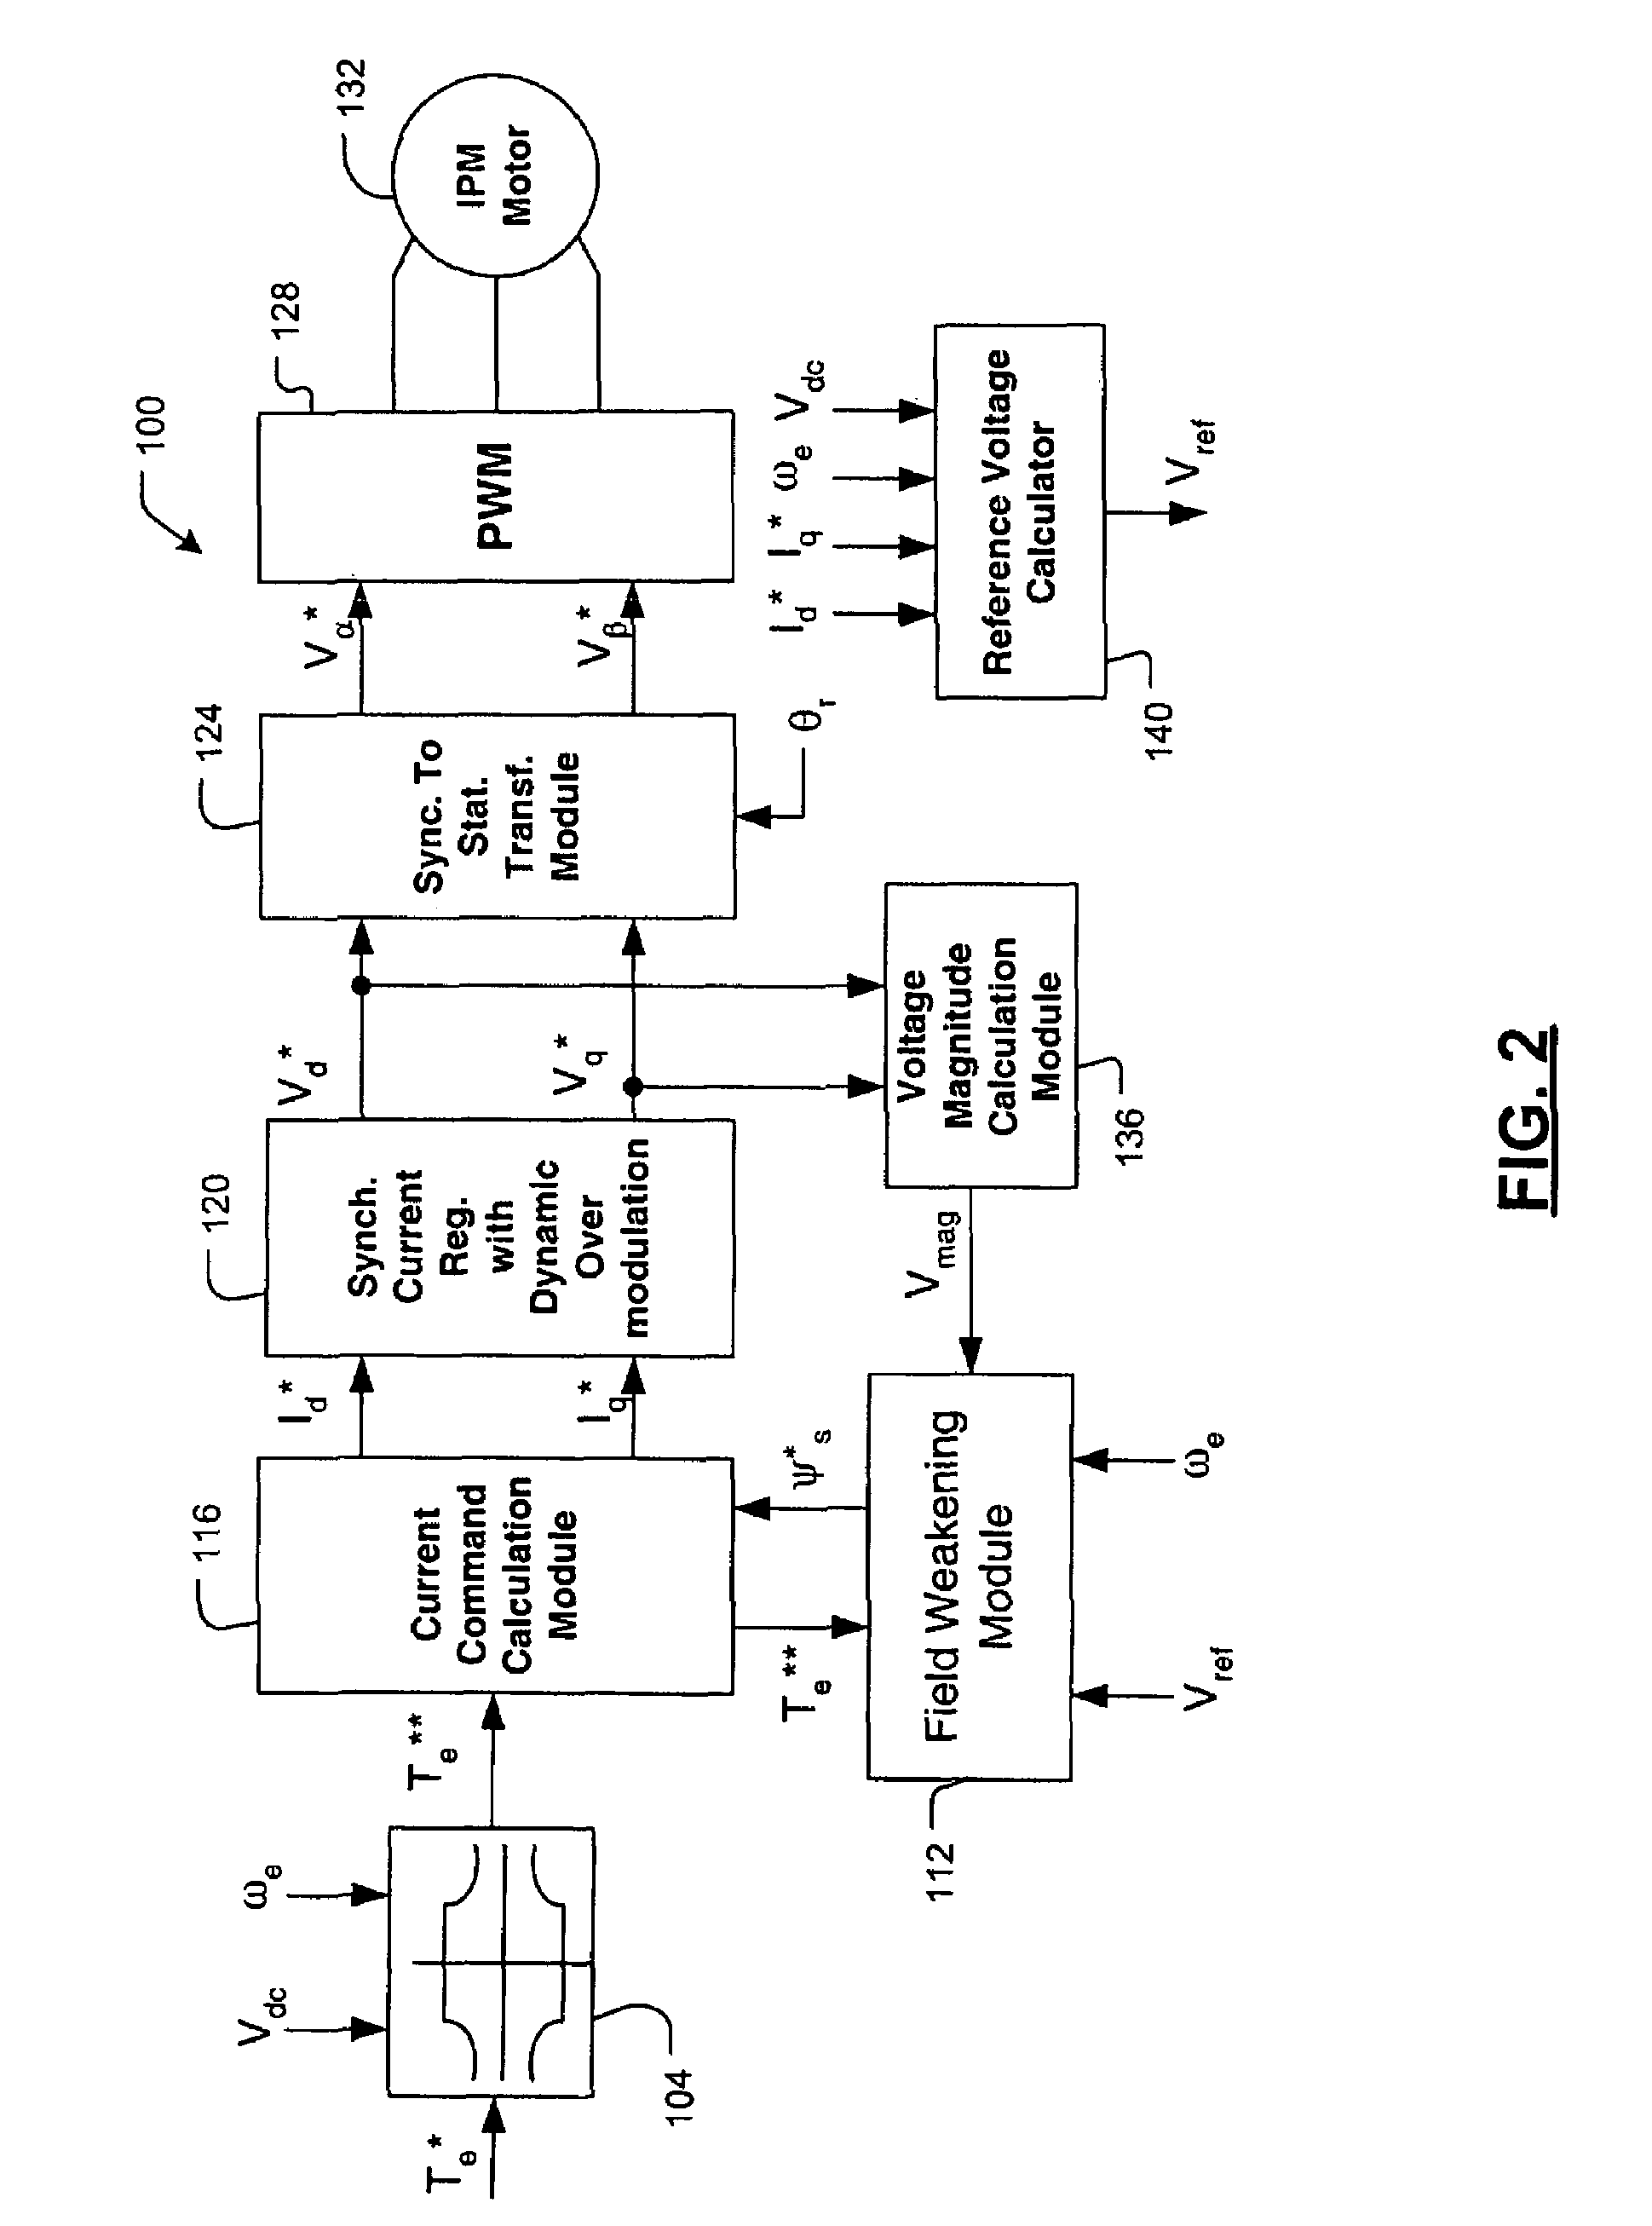 Current regulation for a field weakening motor control system and method